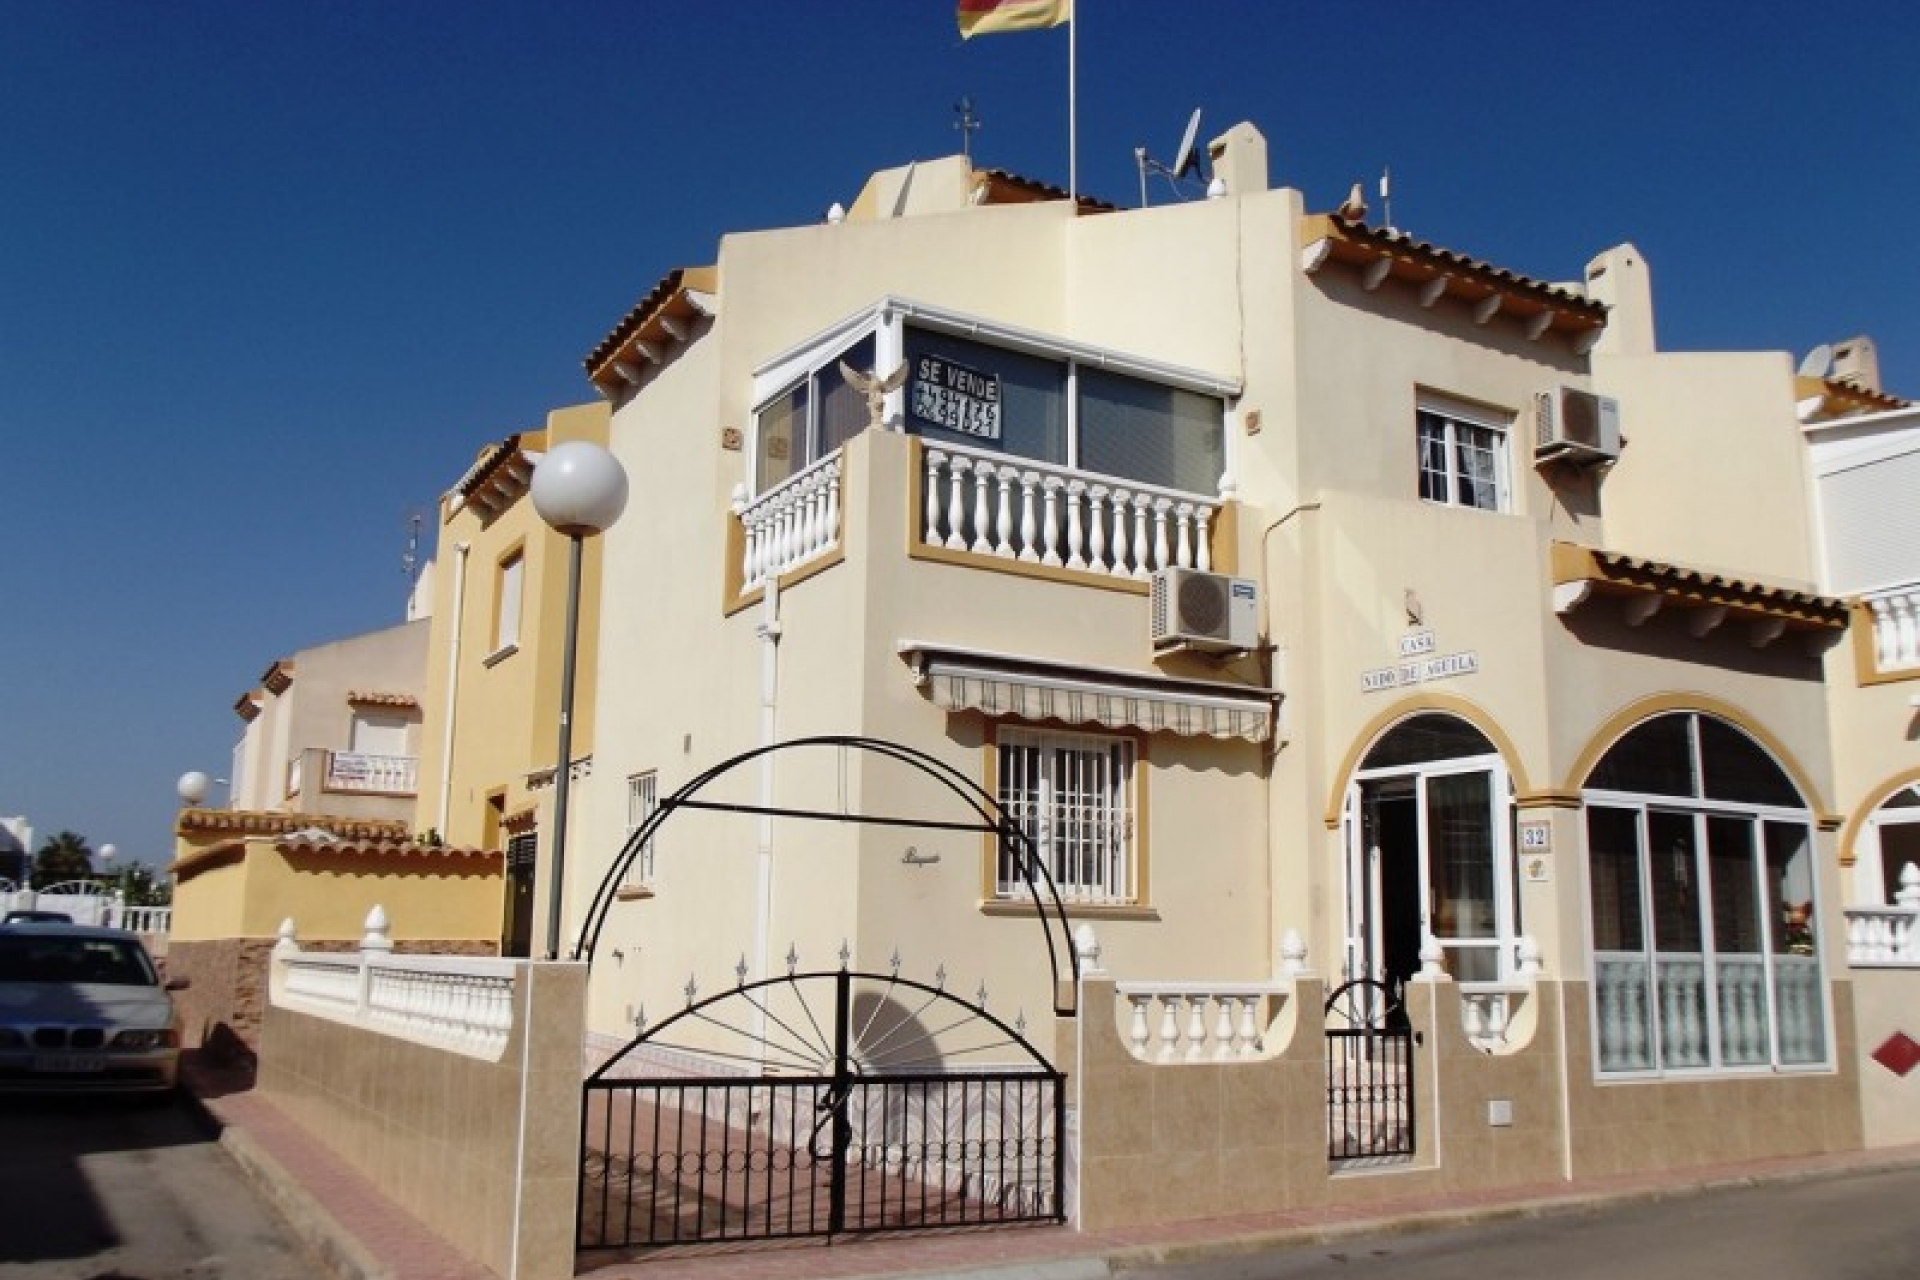 Cheap bargain property for sale Costa Blanca spain